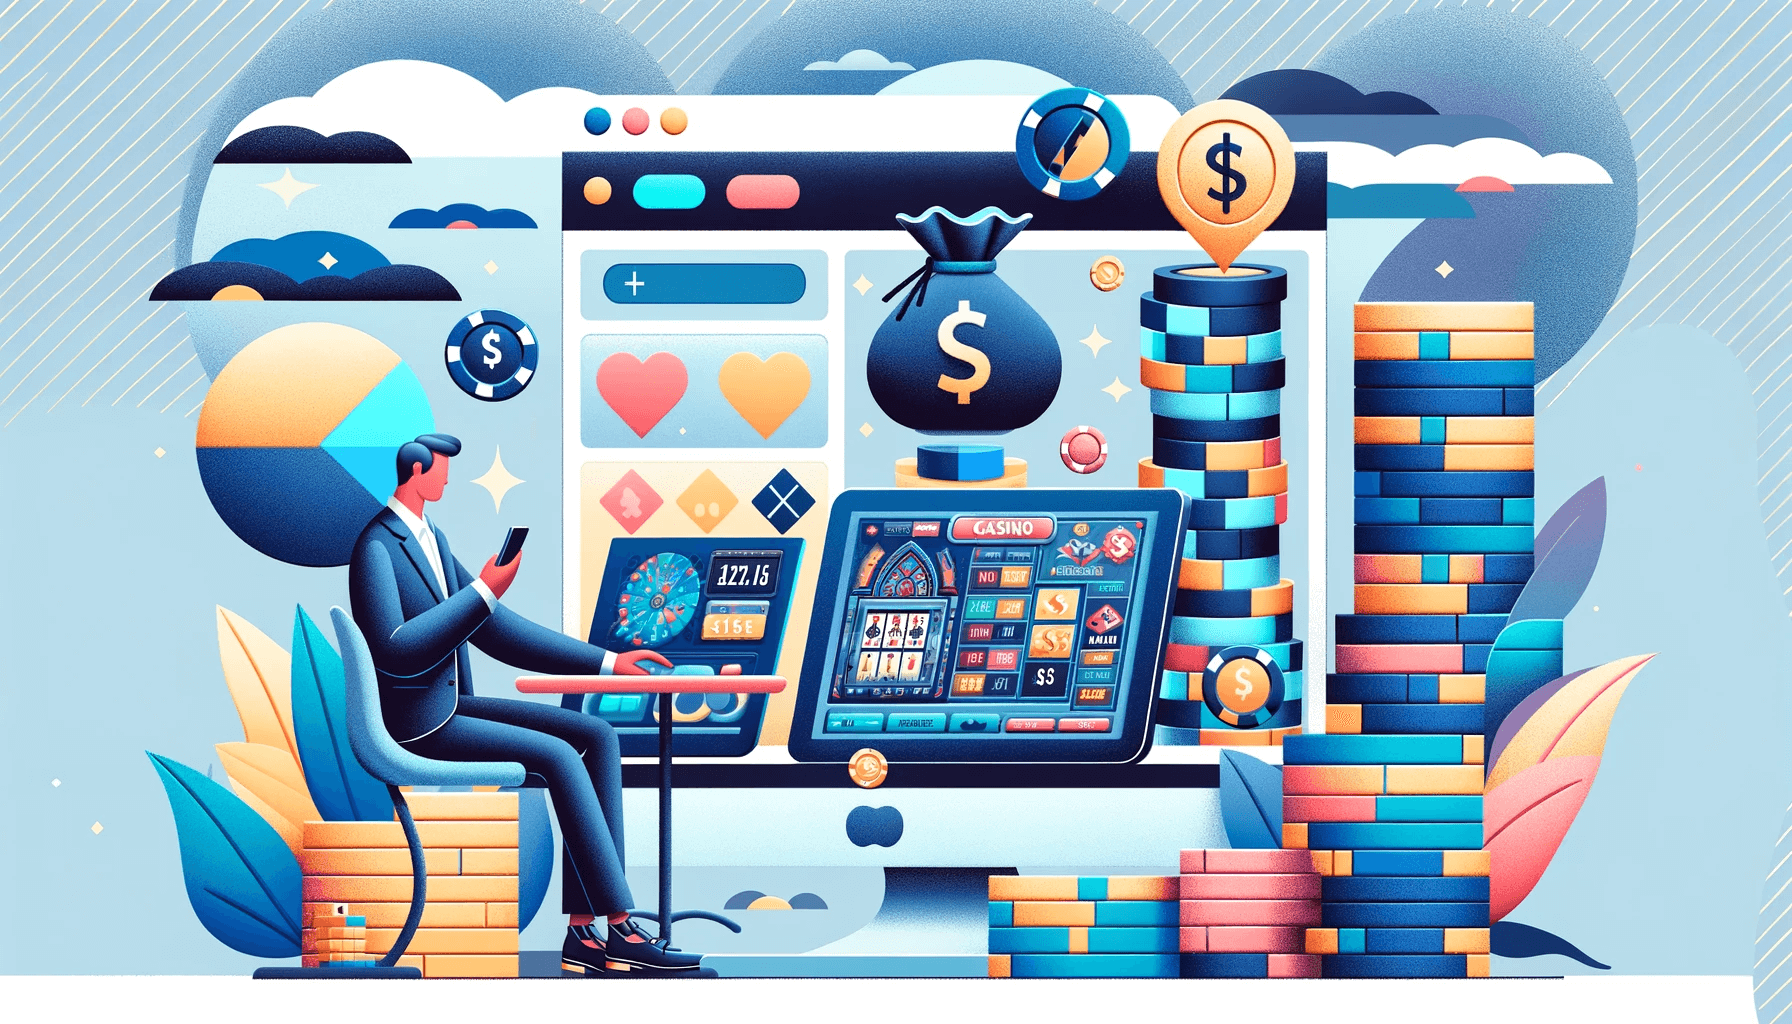 How To Find The Time To The Role of Technology in Shaping Online Gambling: How advancements in tech are transforming gambling experiences. On Facebook